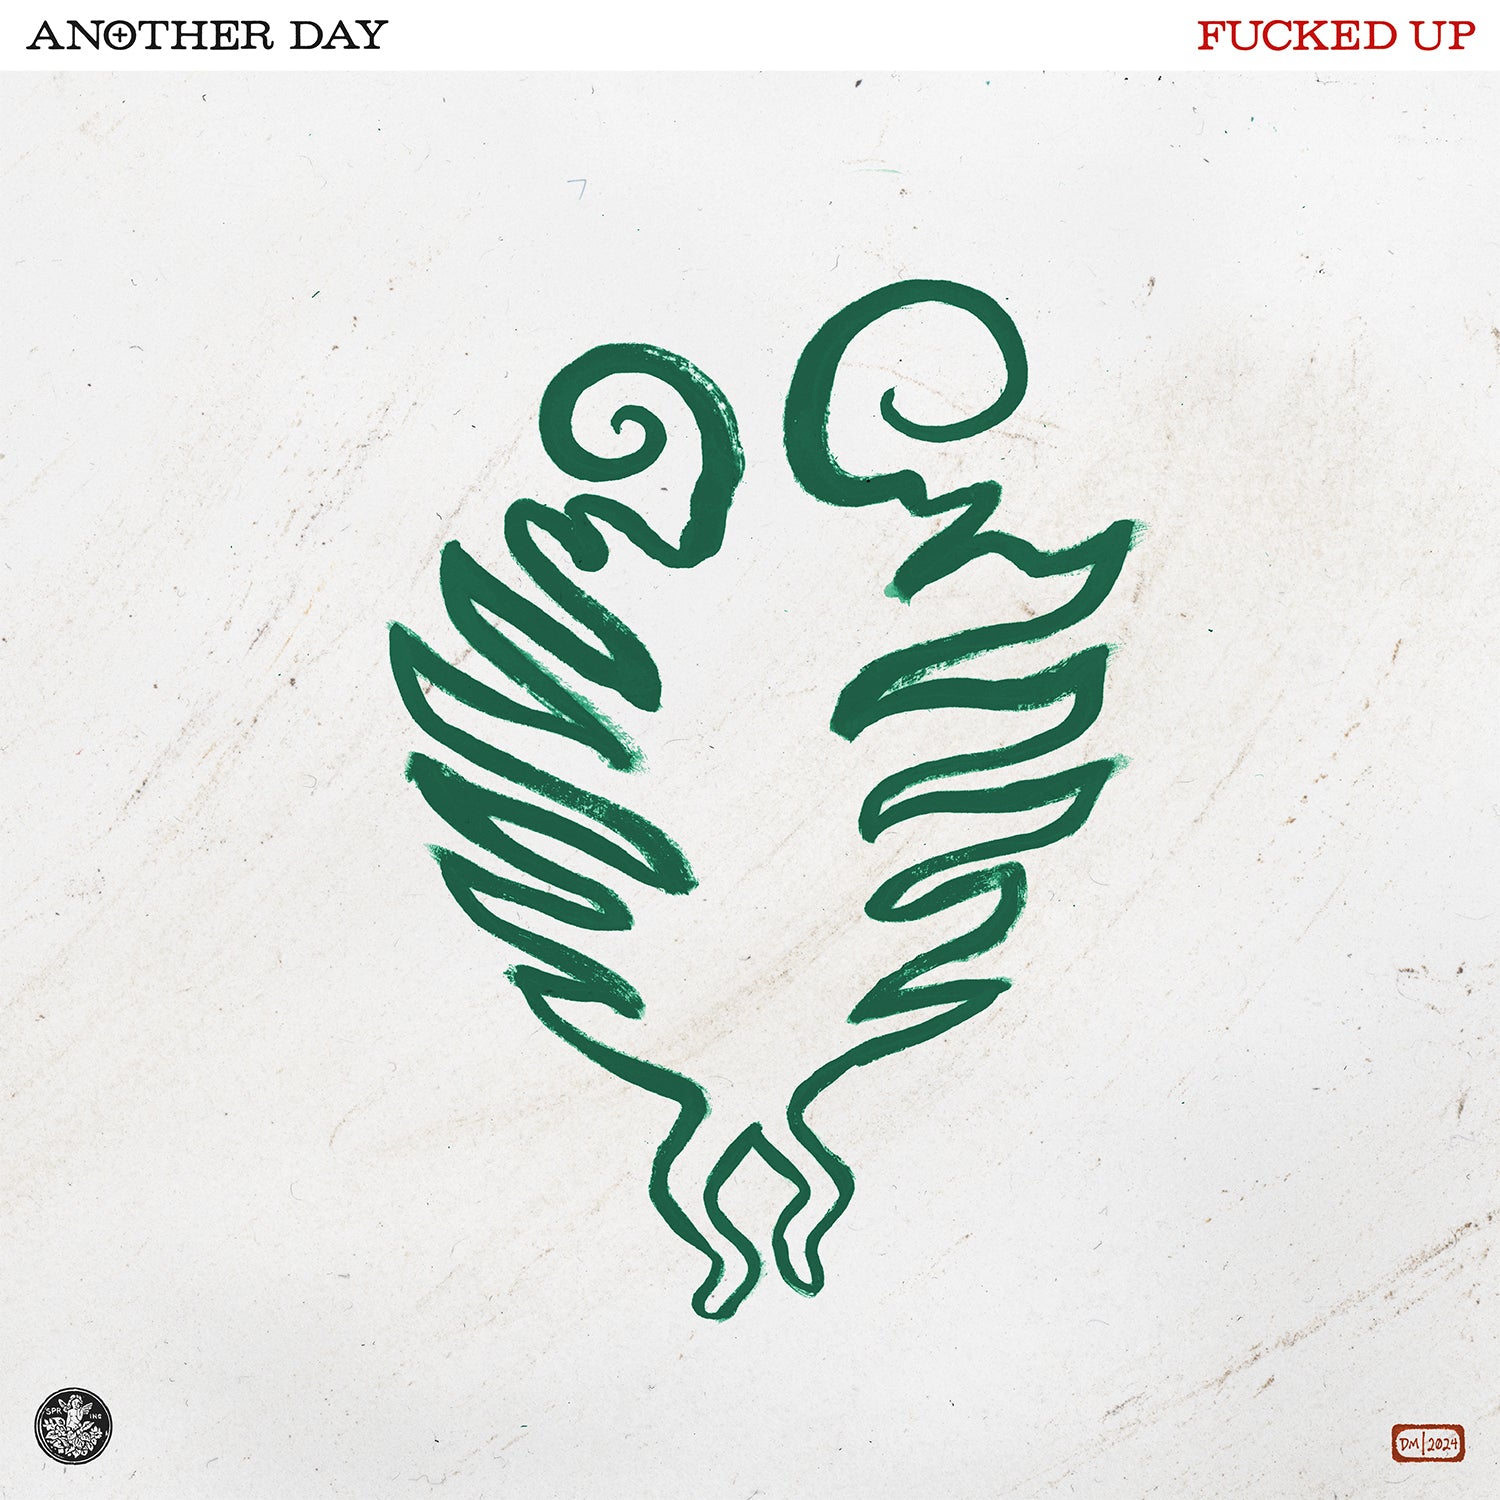 FUCKED UP "Another Day" LP